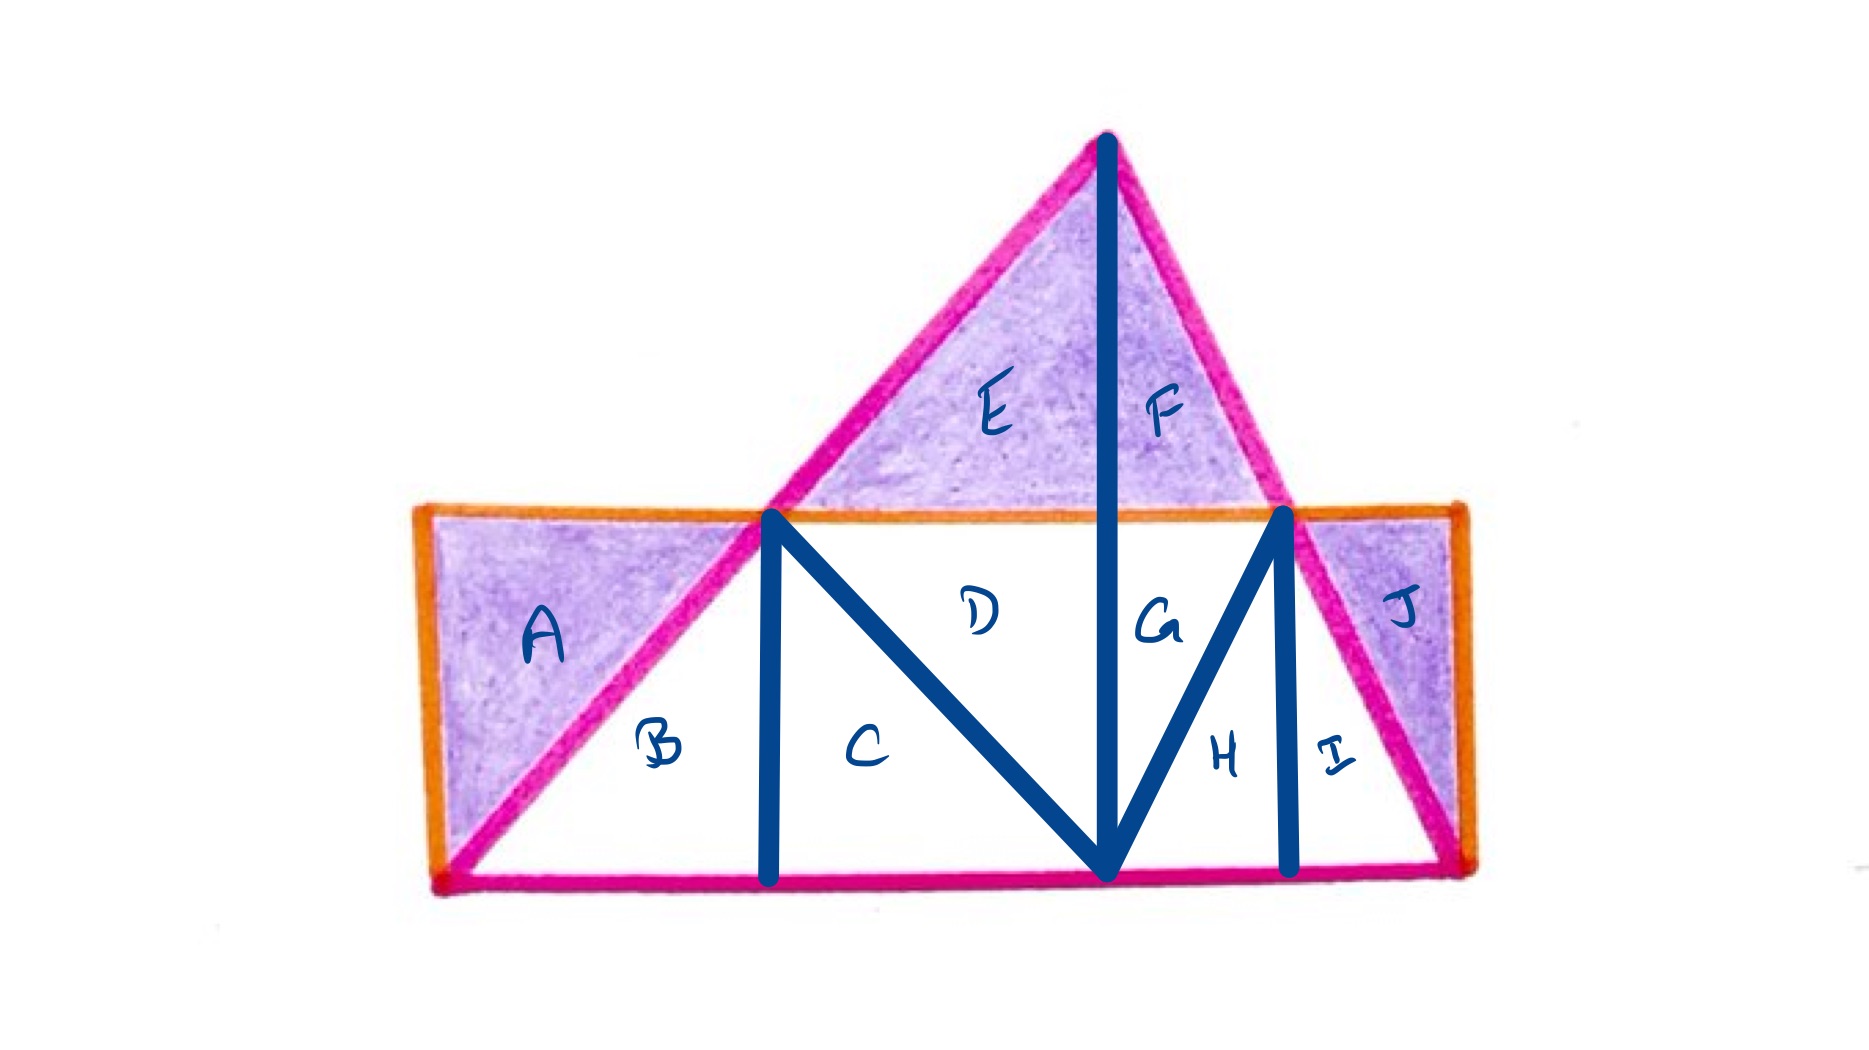 Overlapping triangle and rectangle labelled